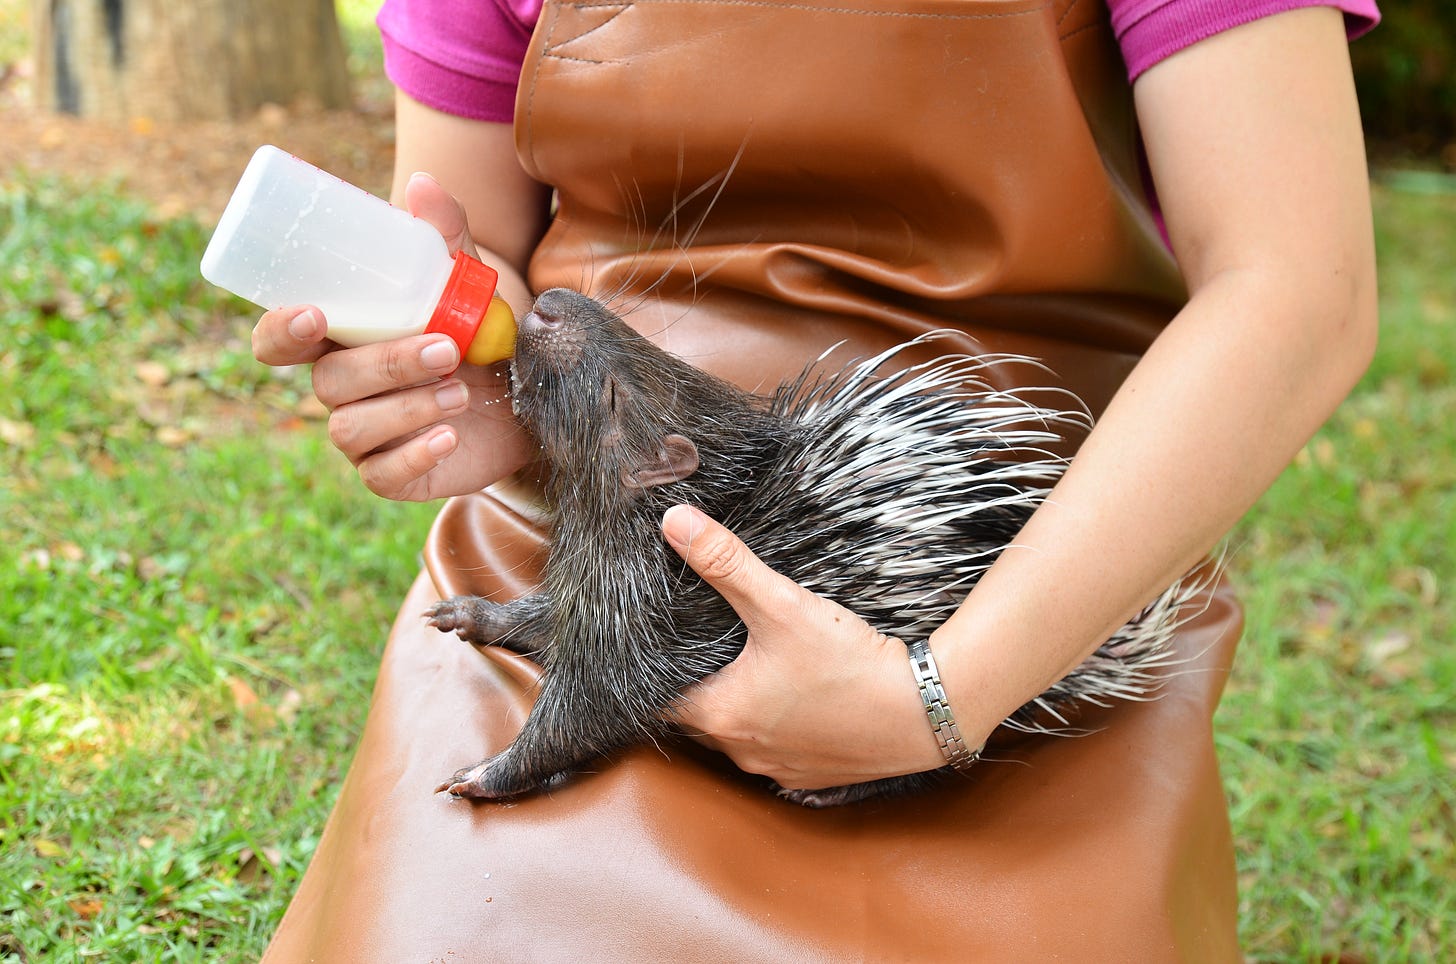 Person holding and bottle feeding a baby porcupine